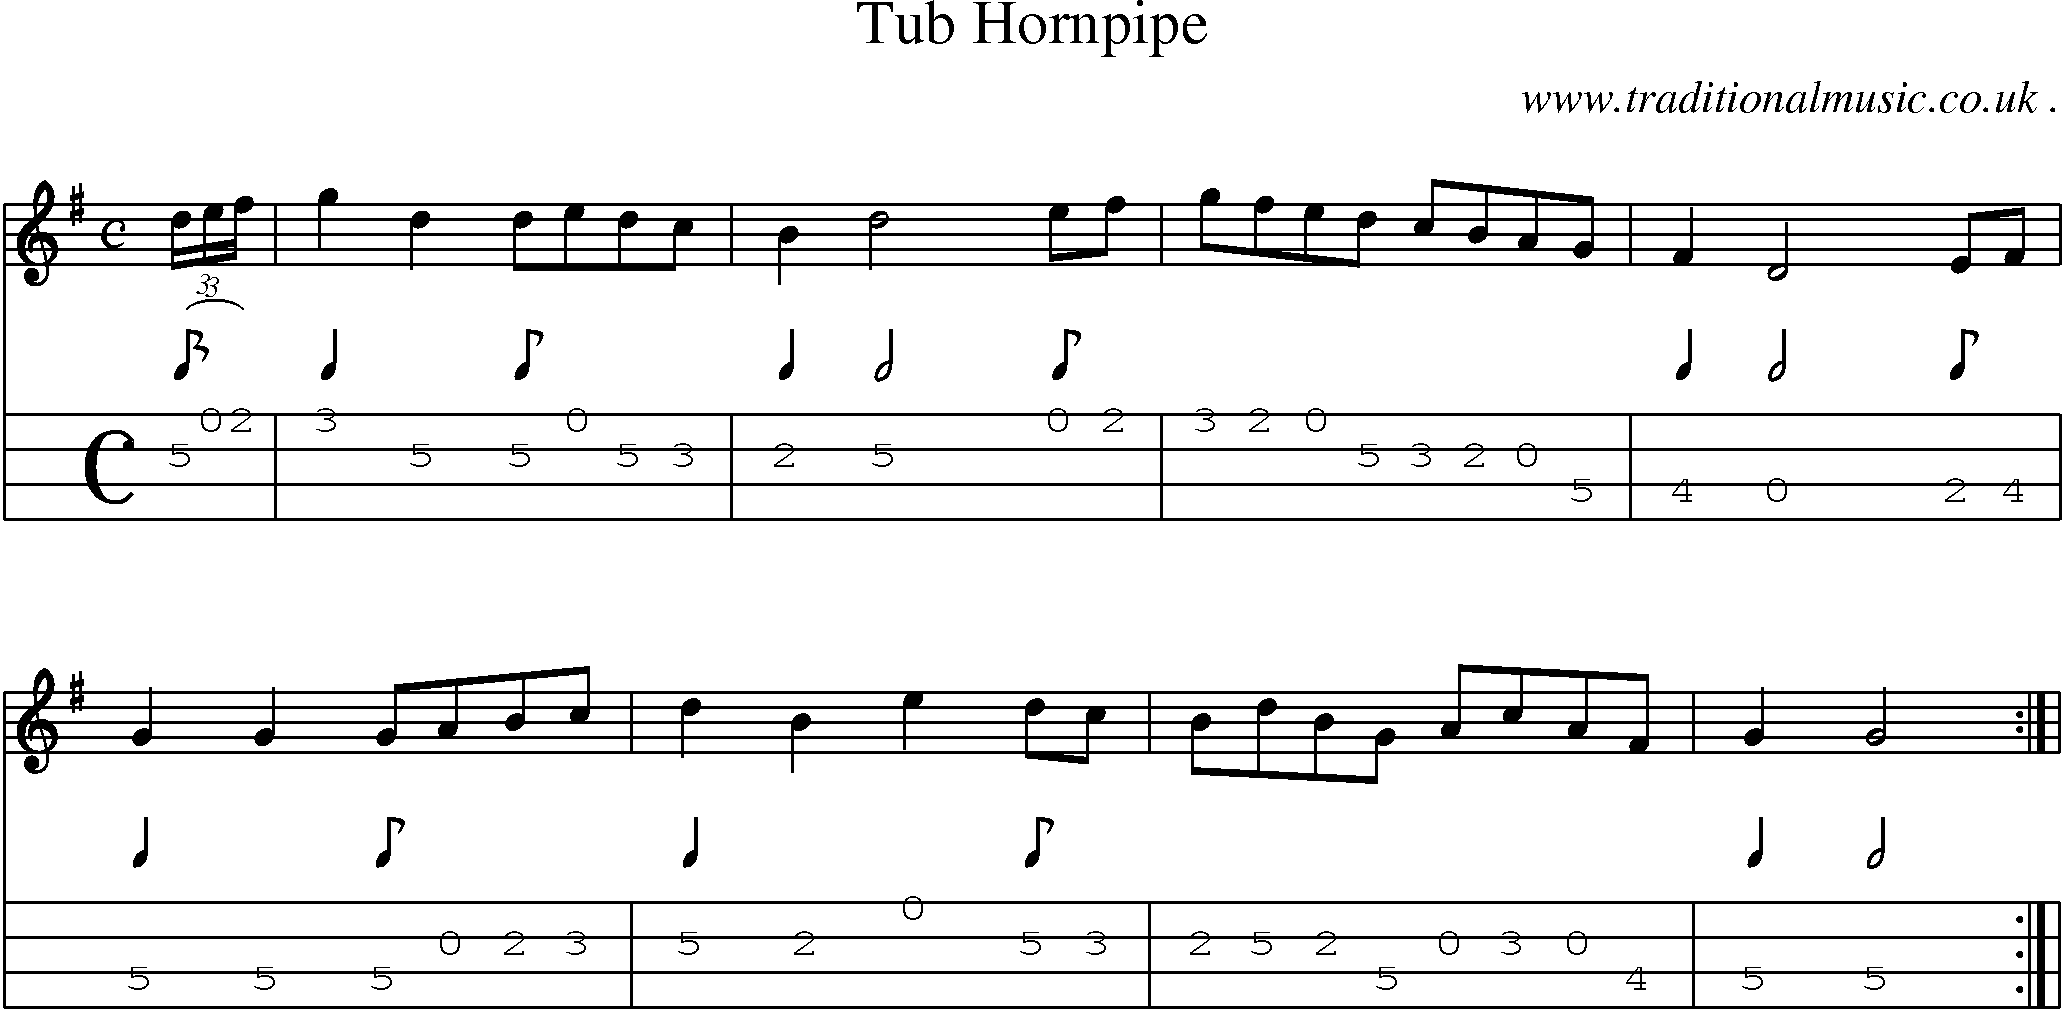 Sheet-Music and Mandolin Tabs for Tub Hornpipe